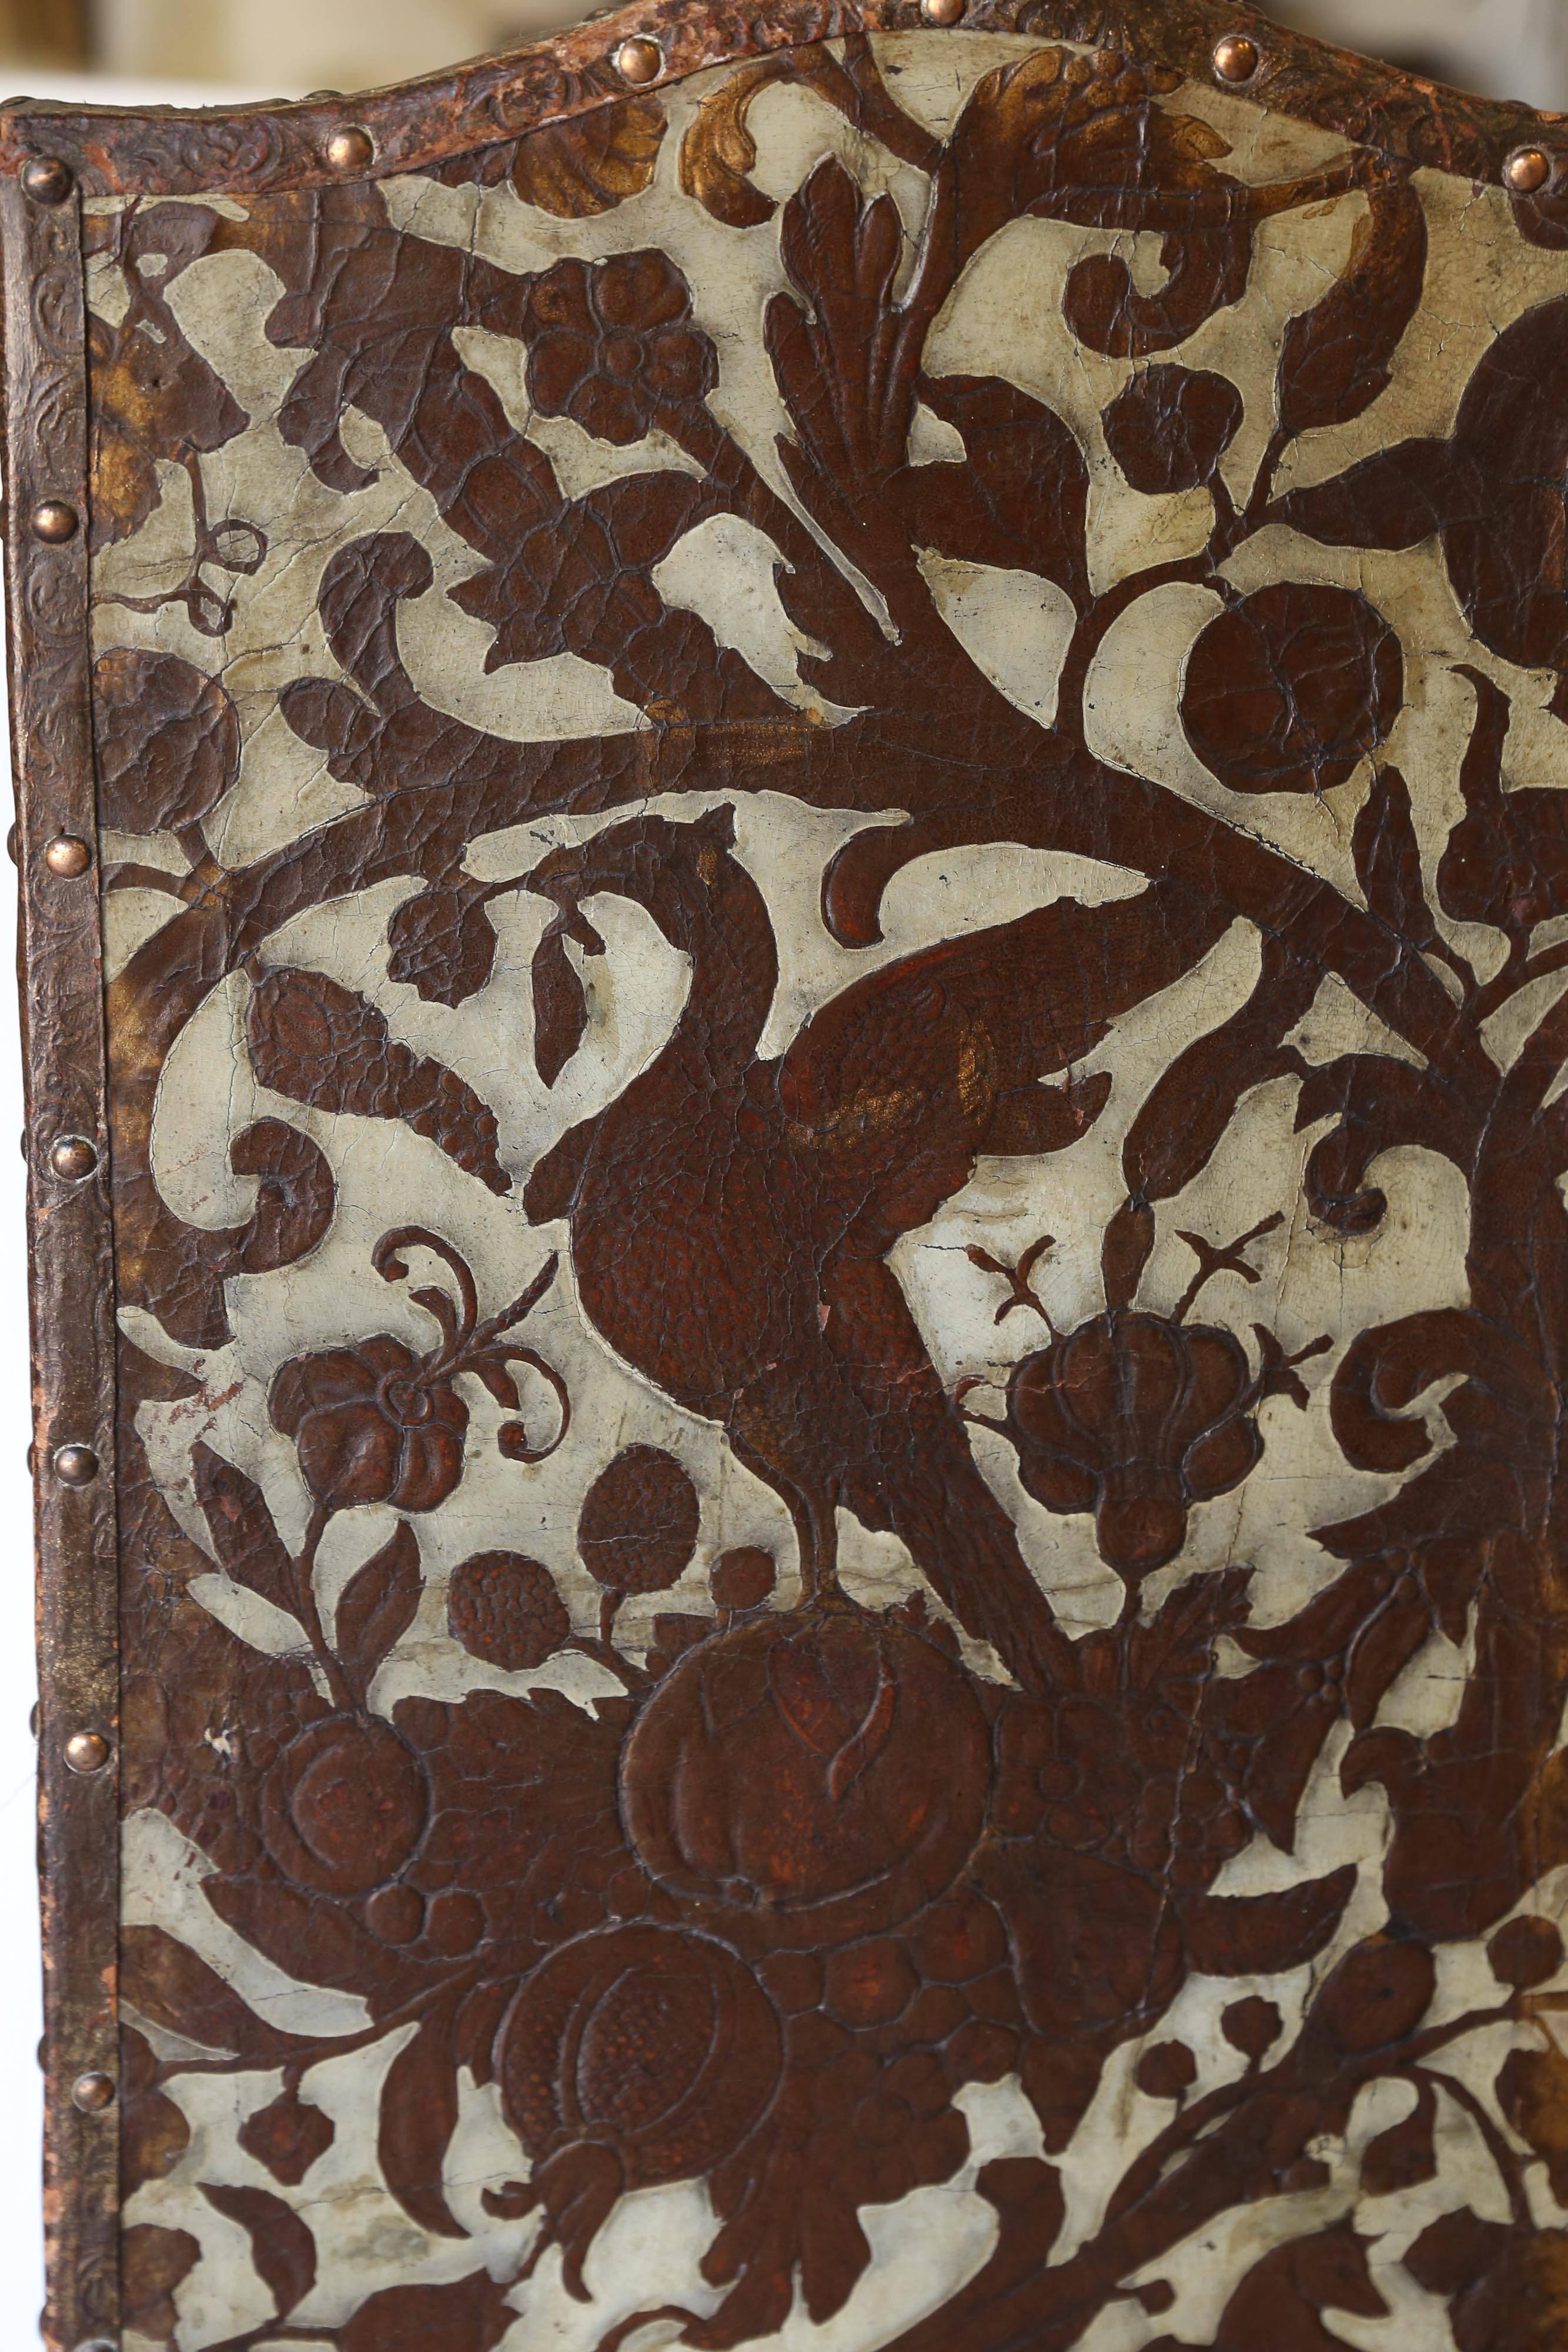 Monkeys, foxes, and birds climb through the vines and flora of this exquisite antique leather screen from Italy. With painted areas still almost fully intact, there are also areas of the original copper gilding remaining. Attached to the frame with